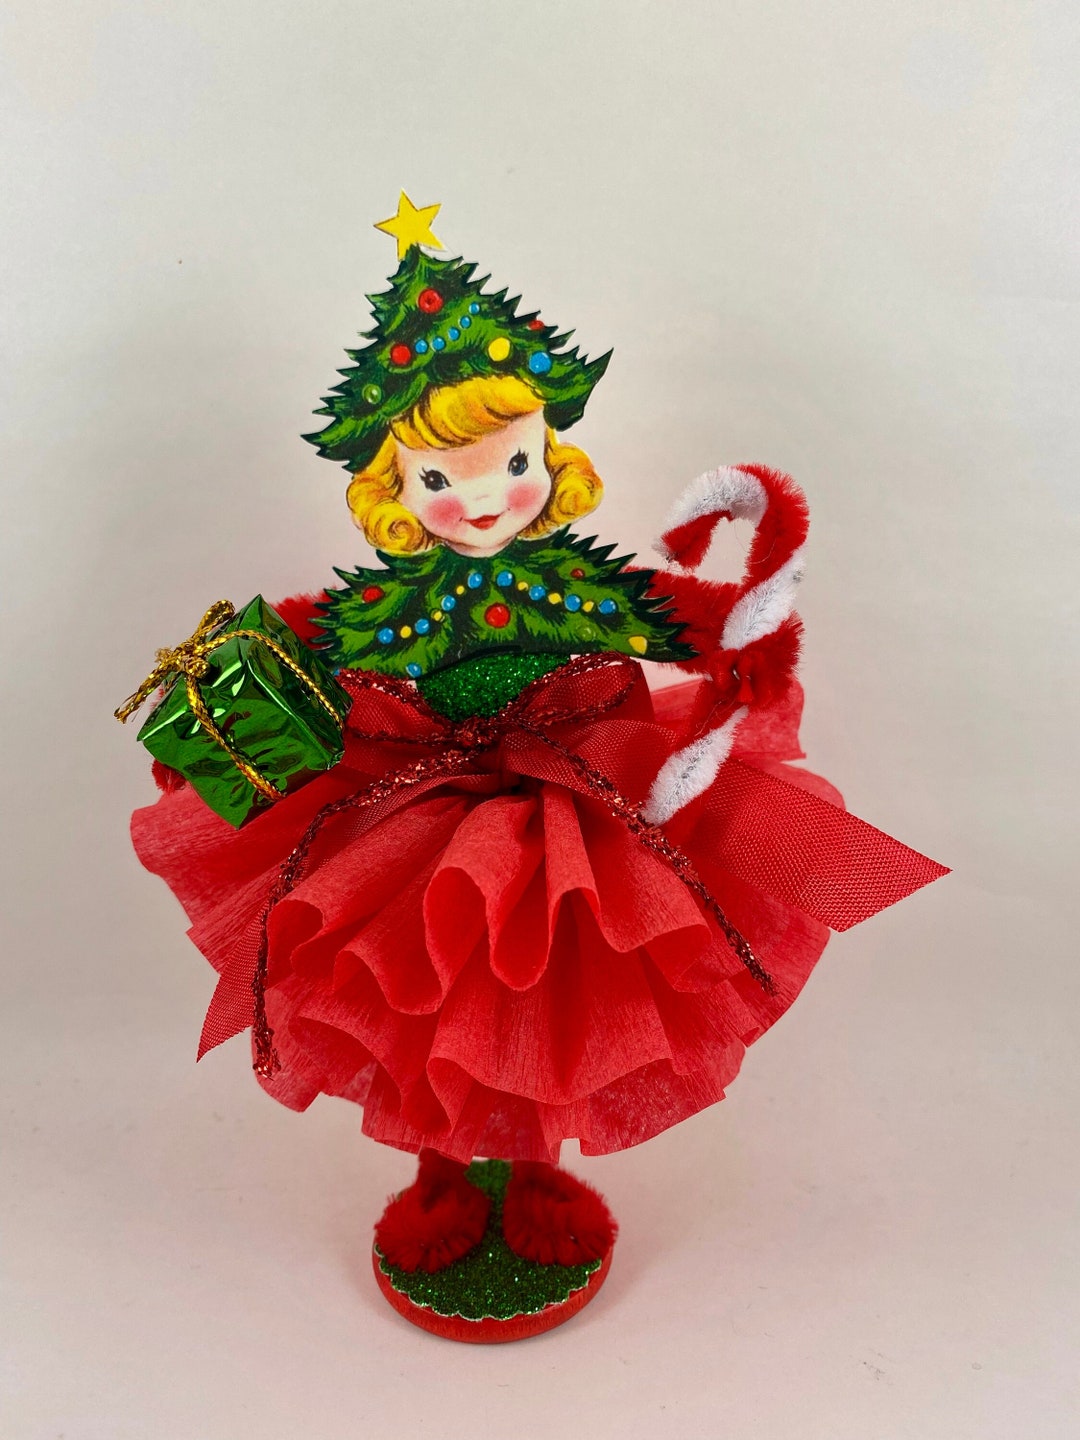 Retro Christmas Bump Chenille Girl With With Present and Candy - Etsy